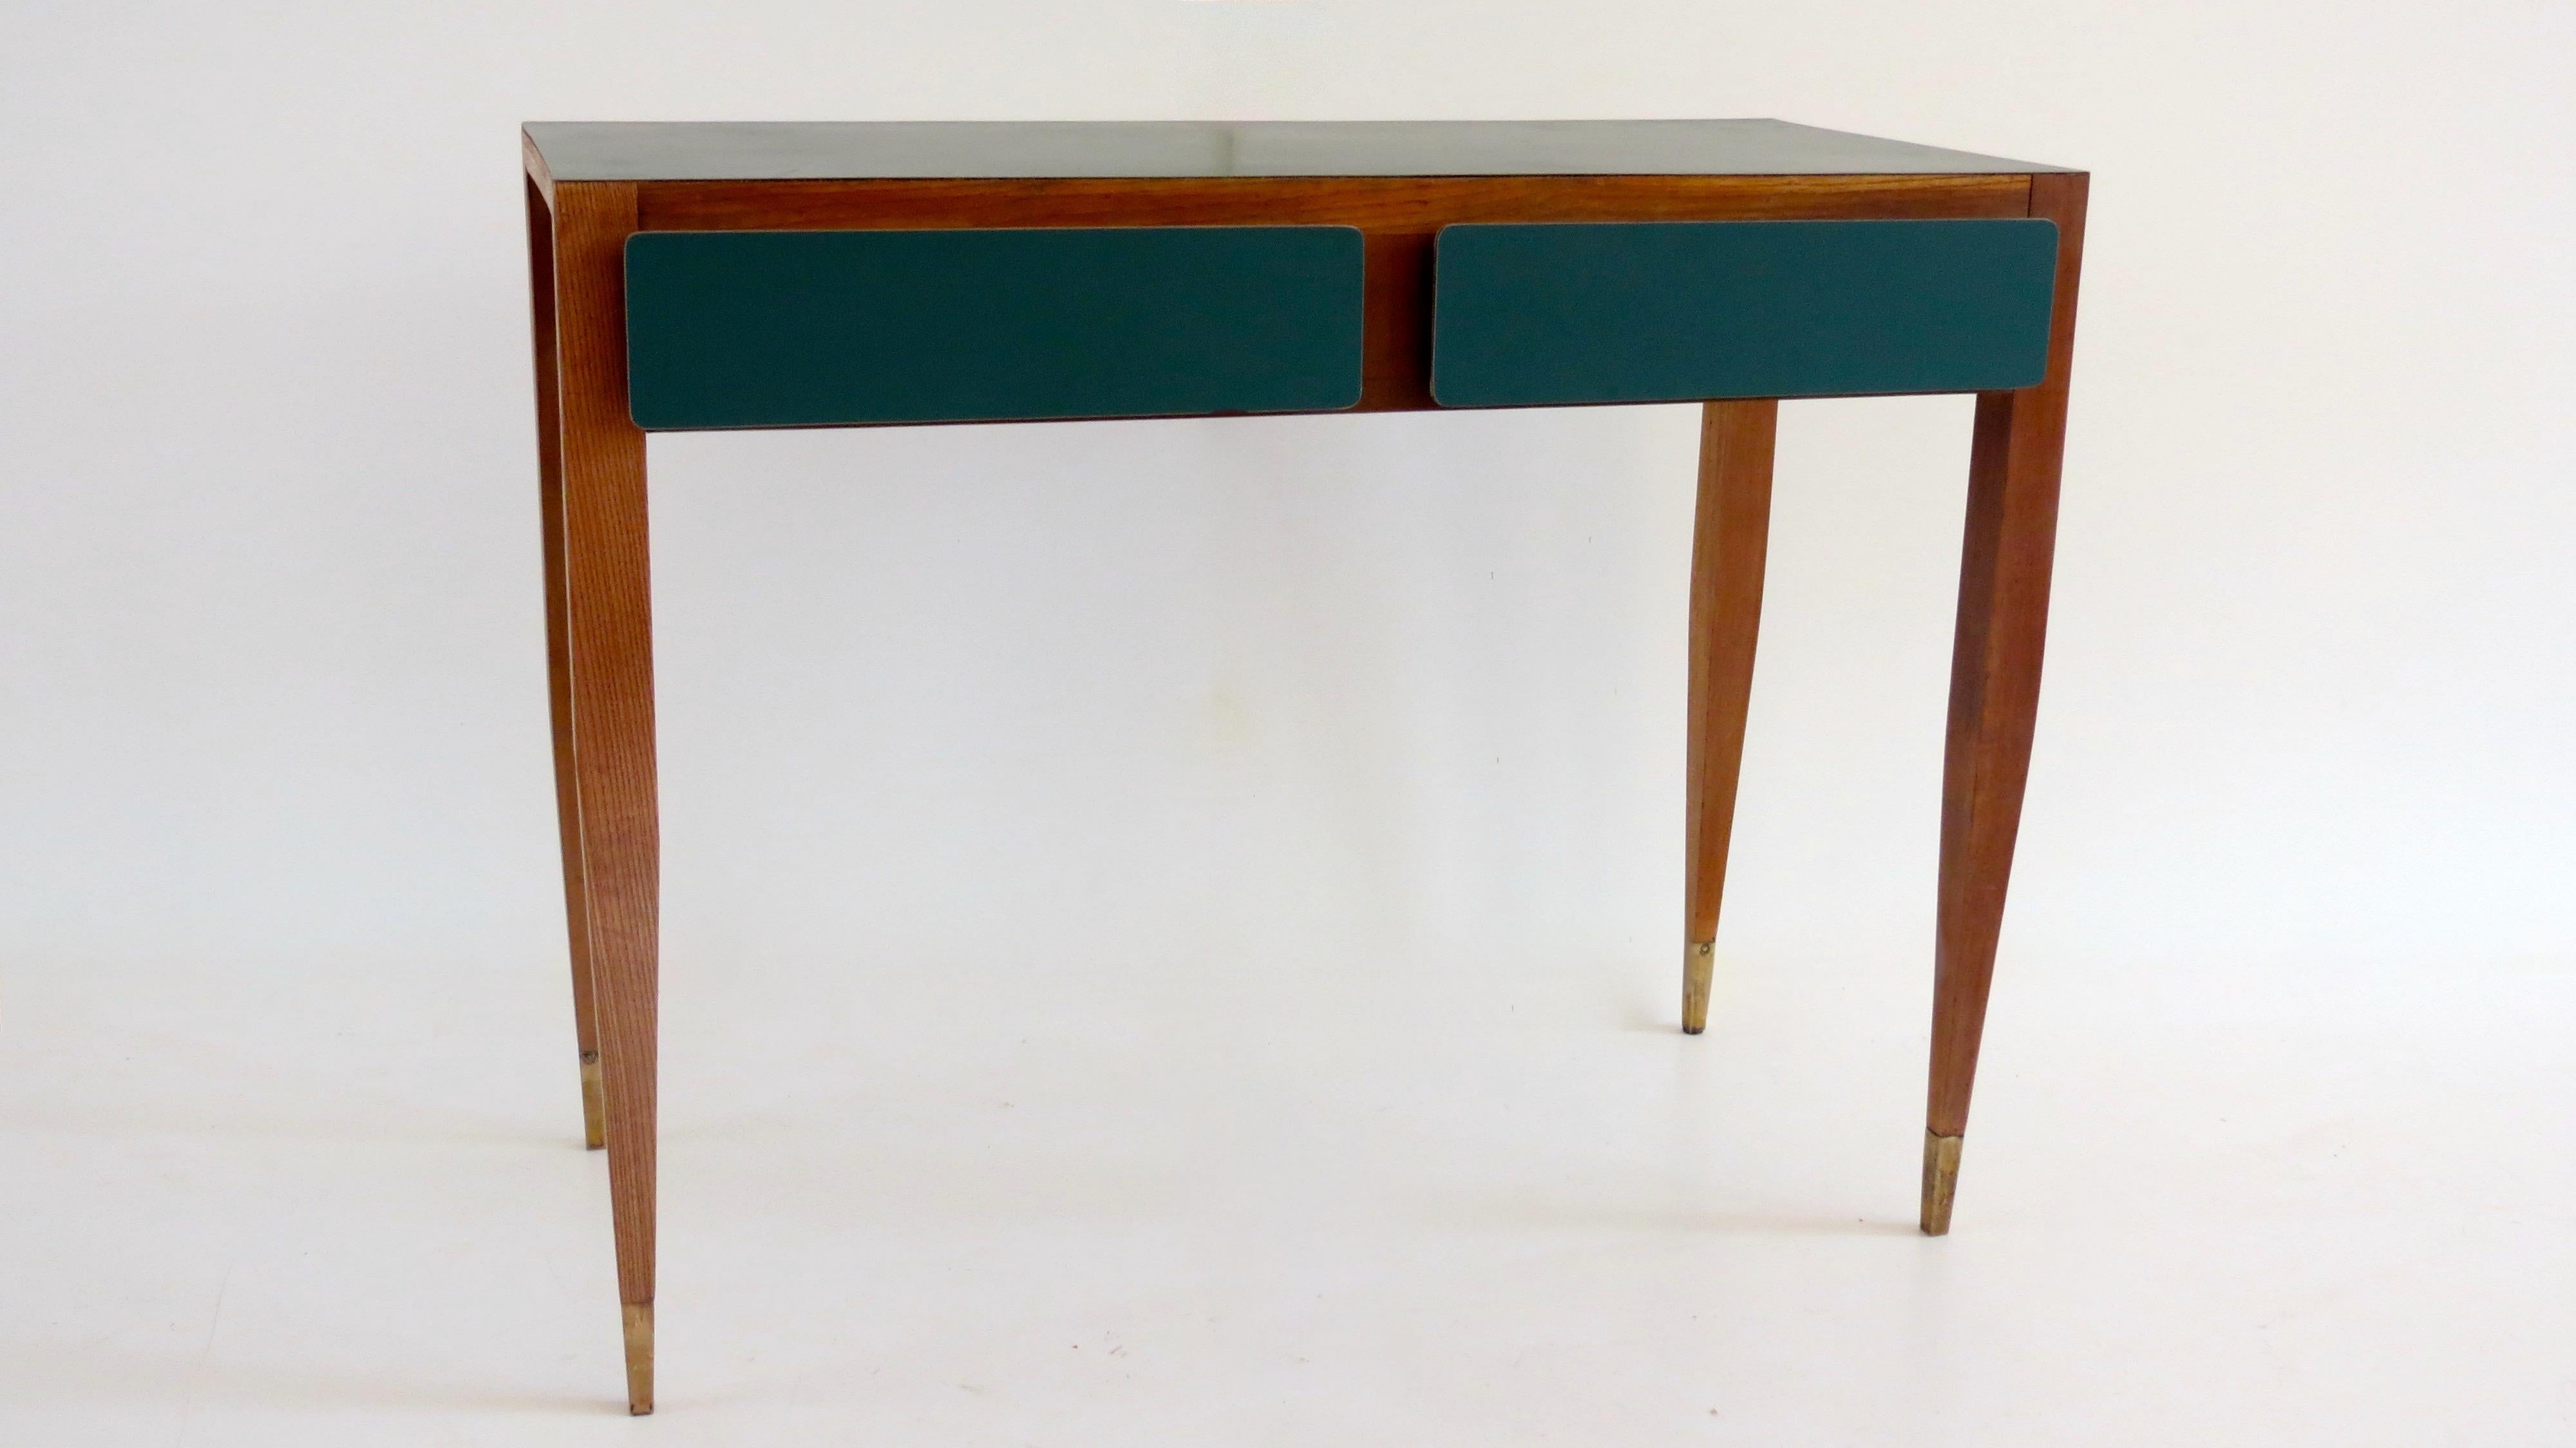 Rare vanity dressing table designed by Gio Ponti for the rooms of the Hotel Parco dei Principi in Roma
manufactured by Giordano Chiesa, 1964
two drawers
ash, laminate, nickel-plated brass- sold without the table mirror on top